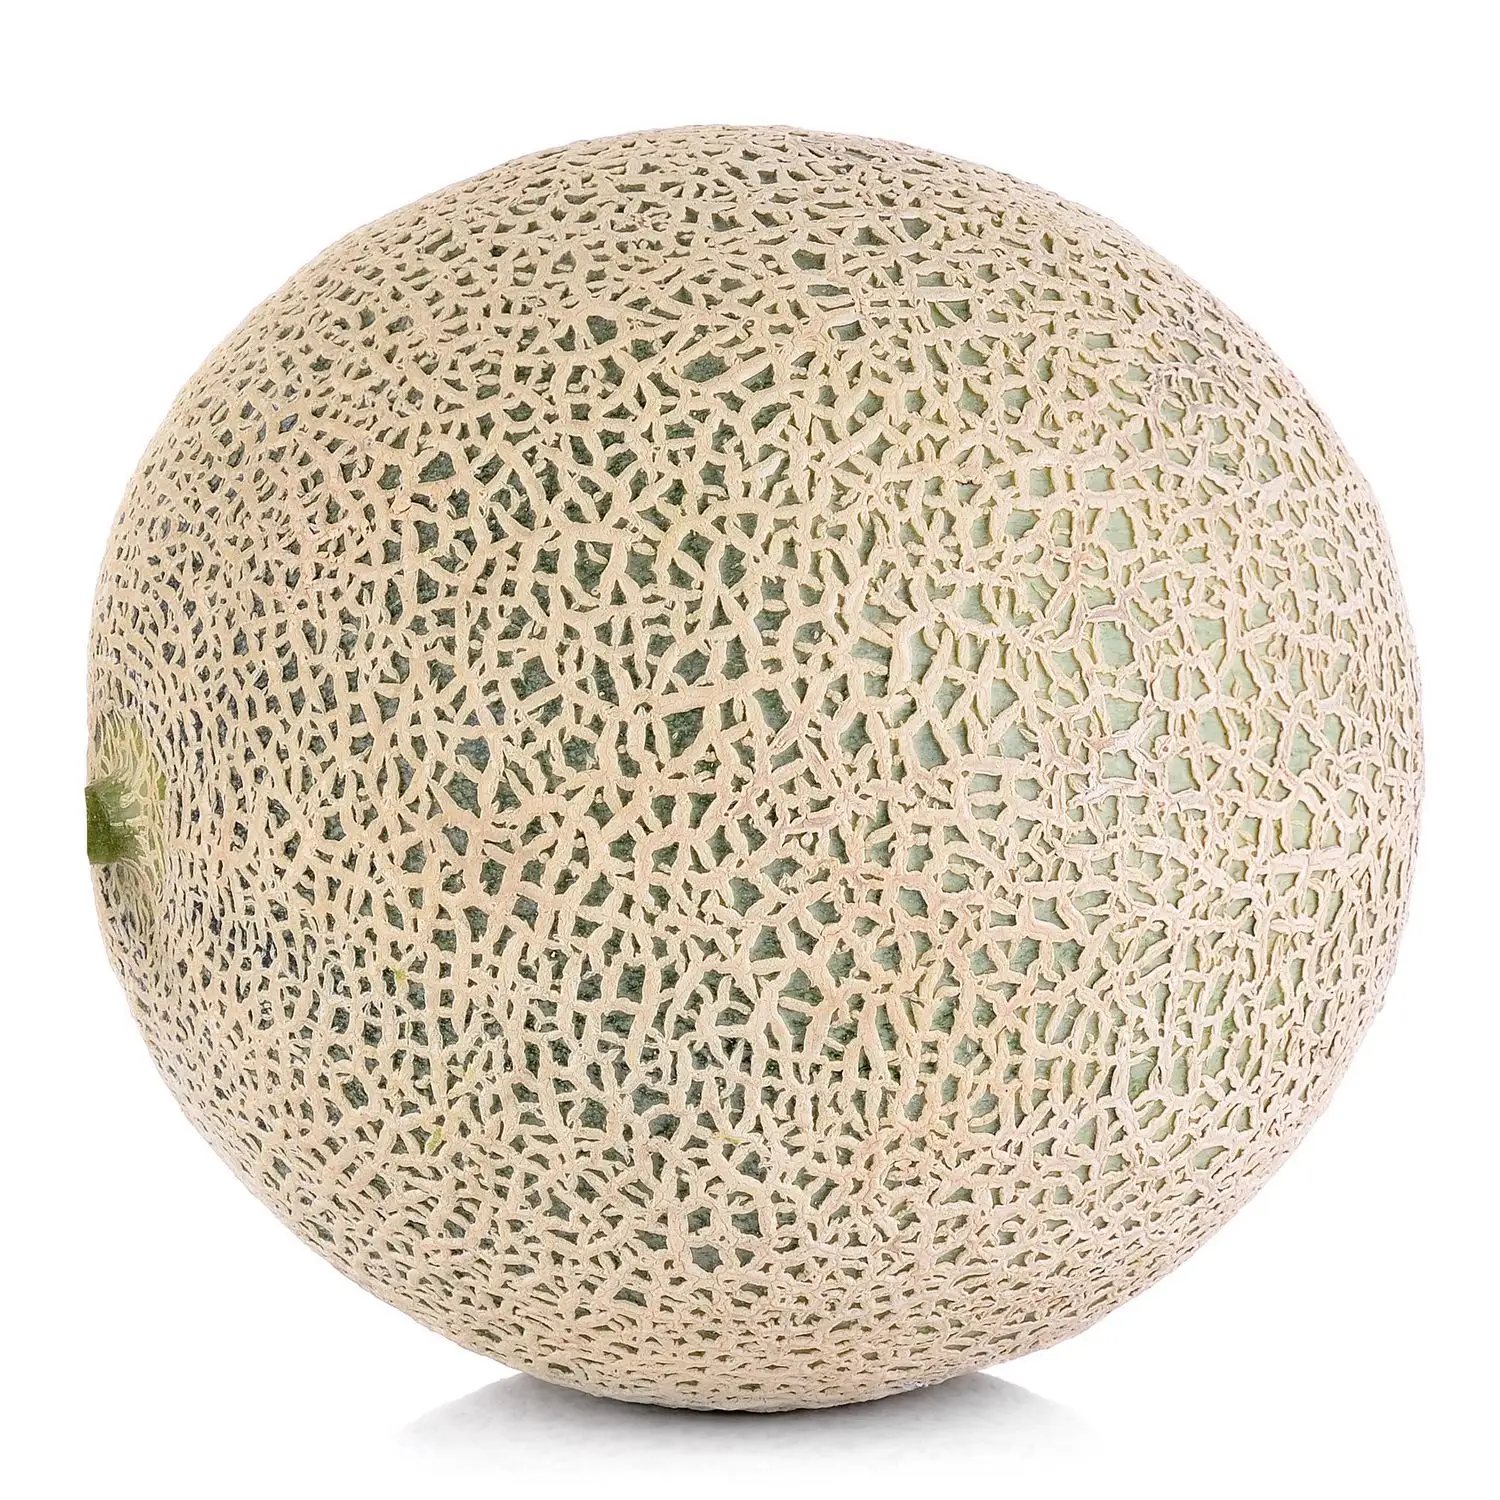 Hot sell Export of Fresh Cantaloupe - Cantaloupe sweet melon seed - LC/TT at sight - from South Africa